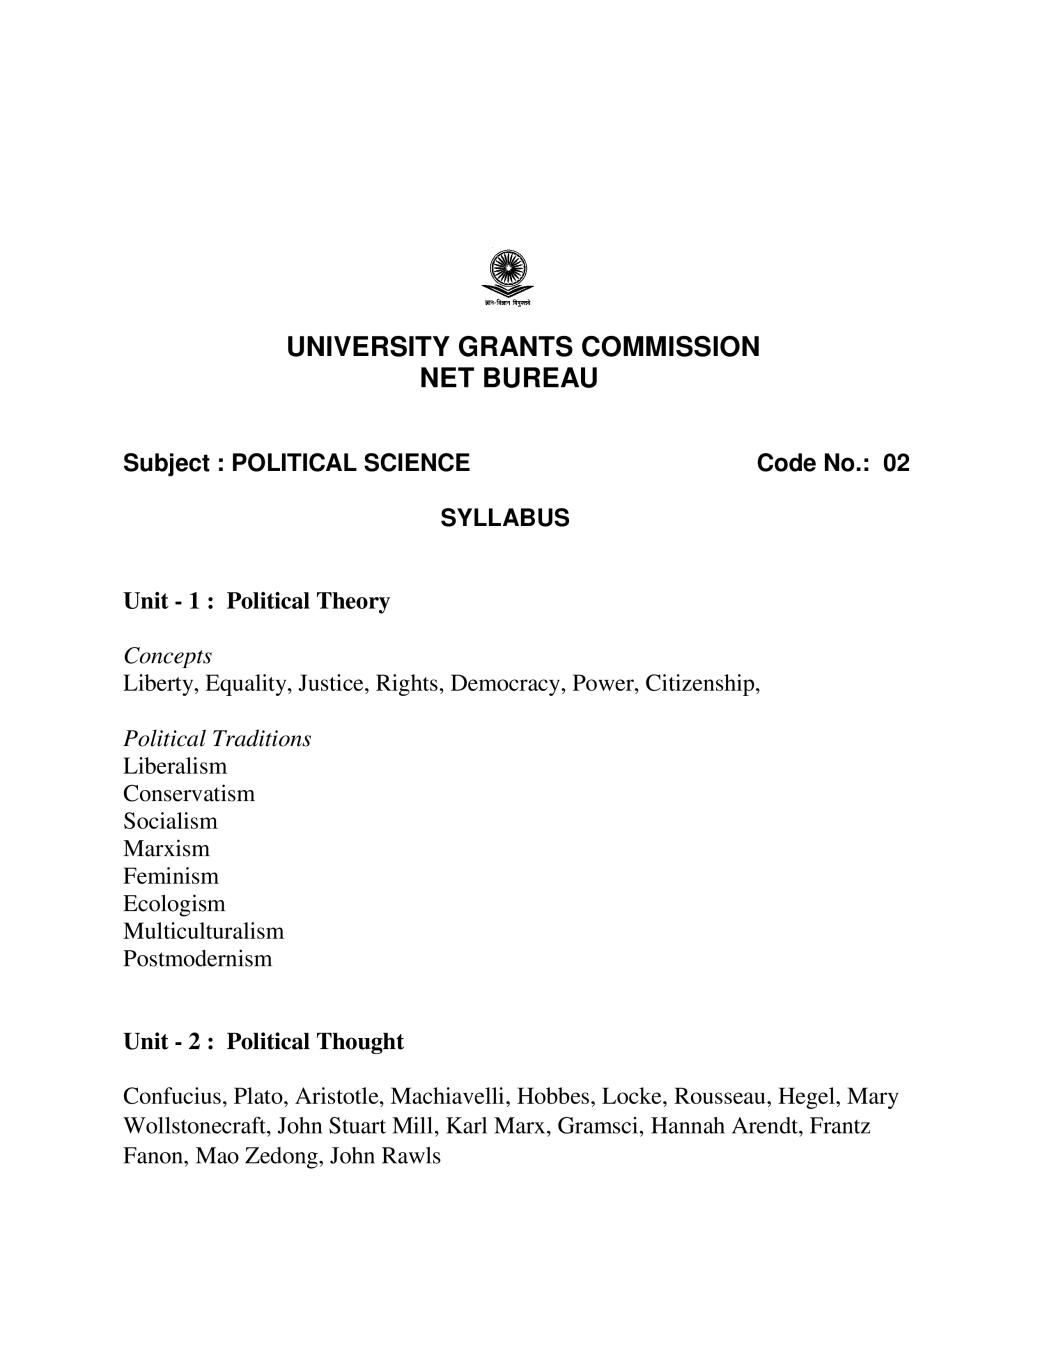 UGC NET Syllabus for Political Science 2020 - Page 1